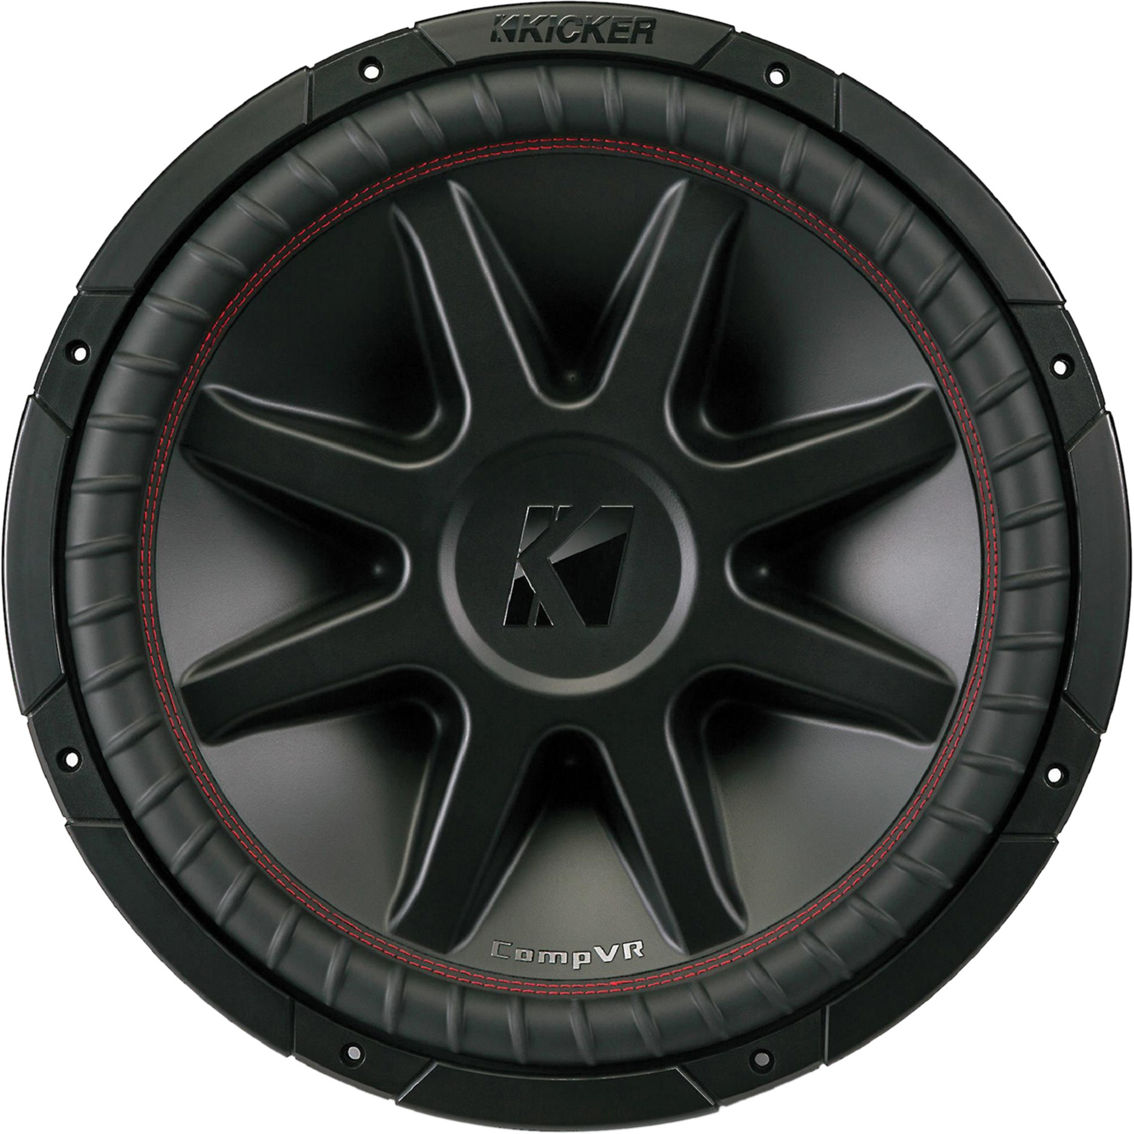 Kicker 43CVR154 CompVR 15 in. 500W Subwoofer with Dual 4 Ohm Voice Coils - Image 2 of 5